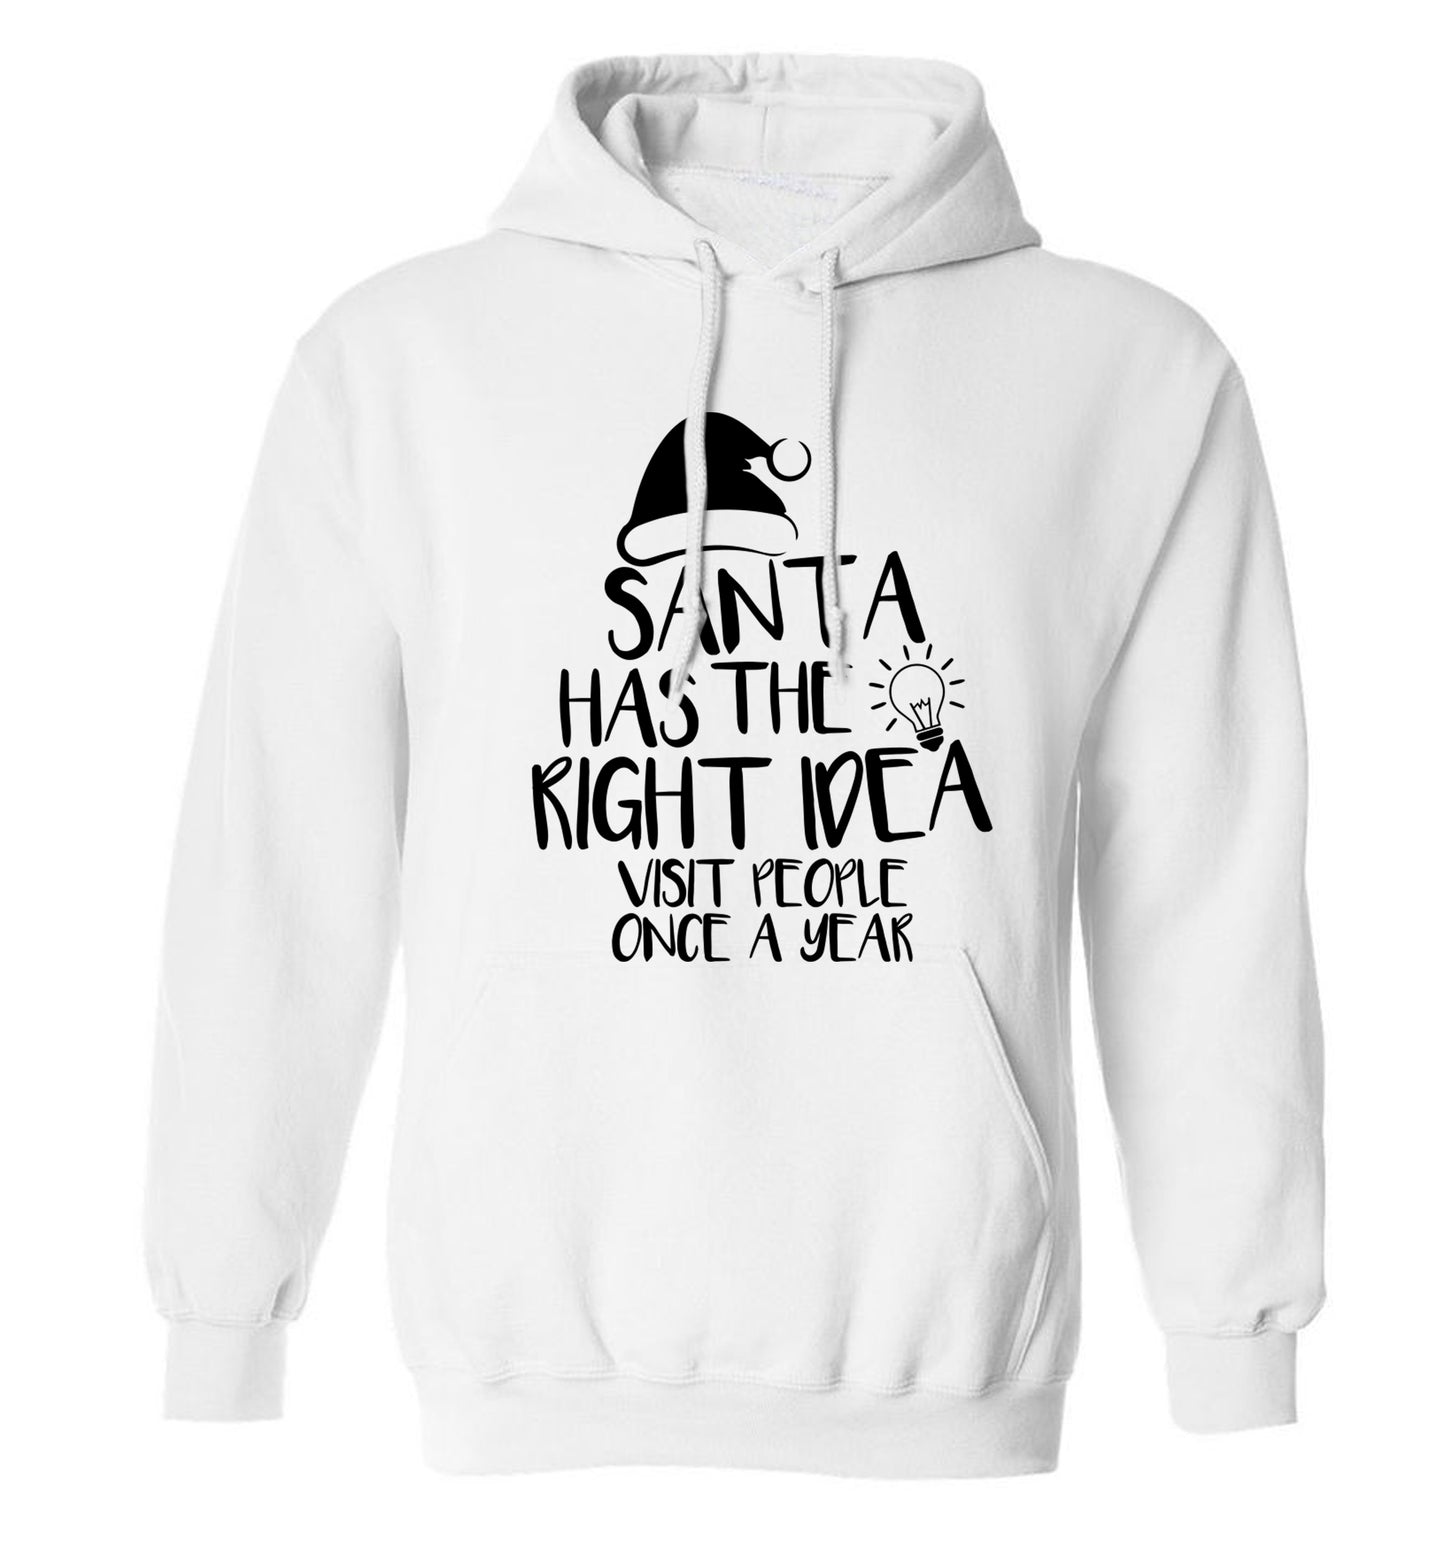 Santa has the right idea visit people once a year adults unisex white hoodie 2XL